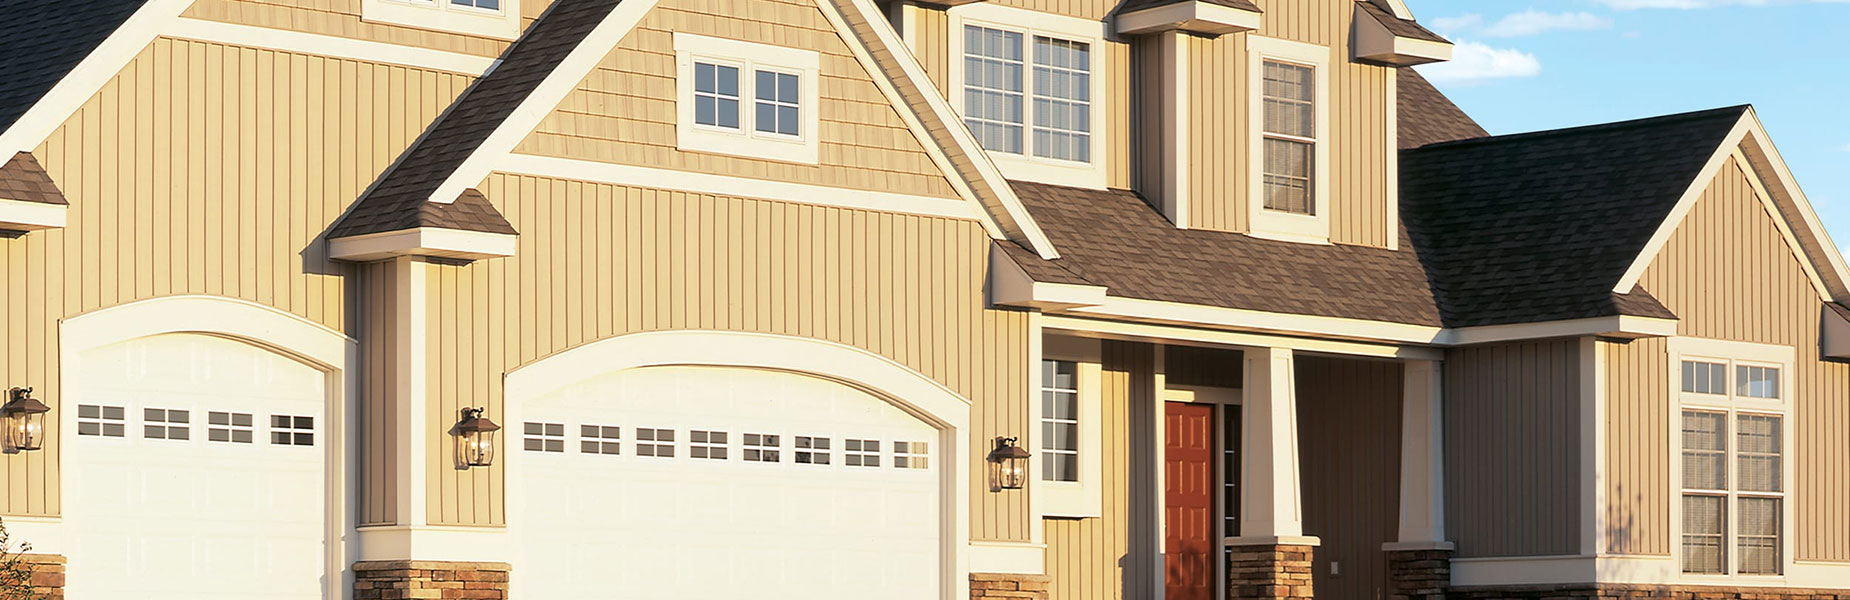 Ask Signature Siding about installing Hardie board products on your home or business in Vernon, Kelowna and surrounding areas!